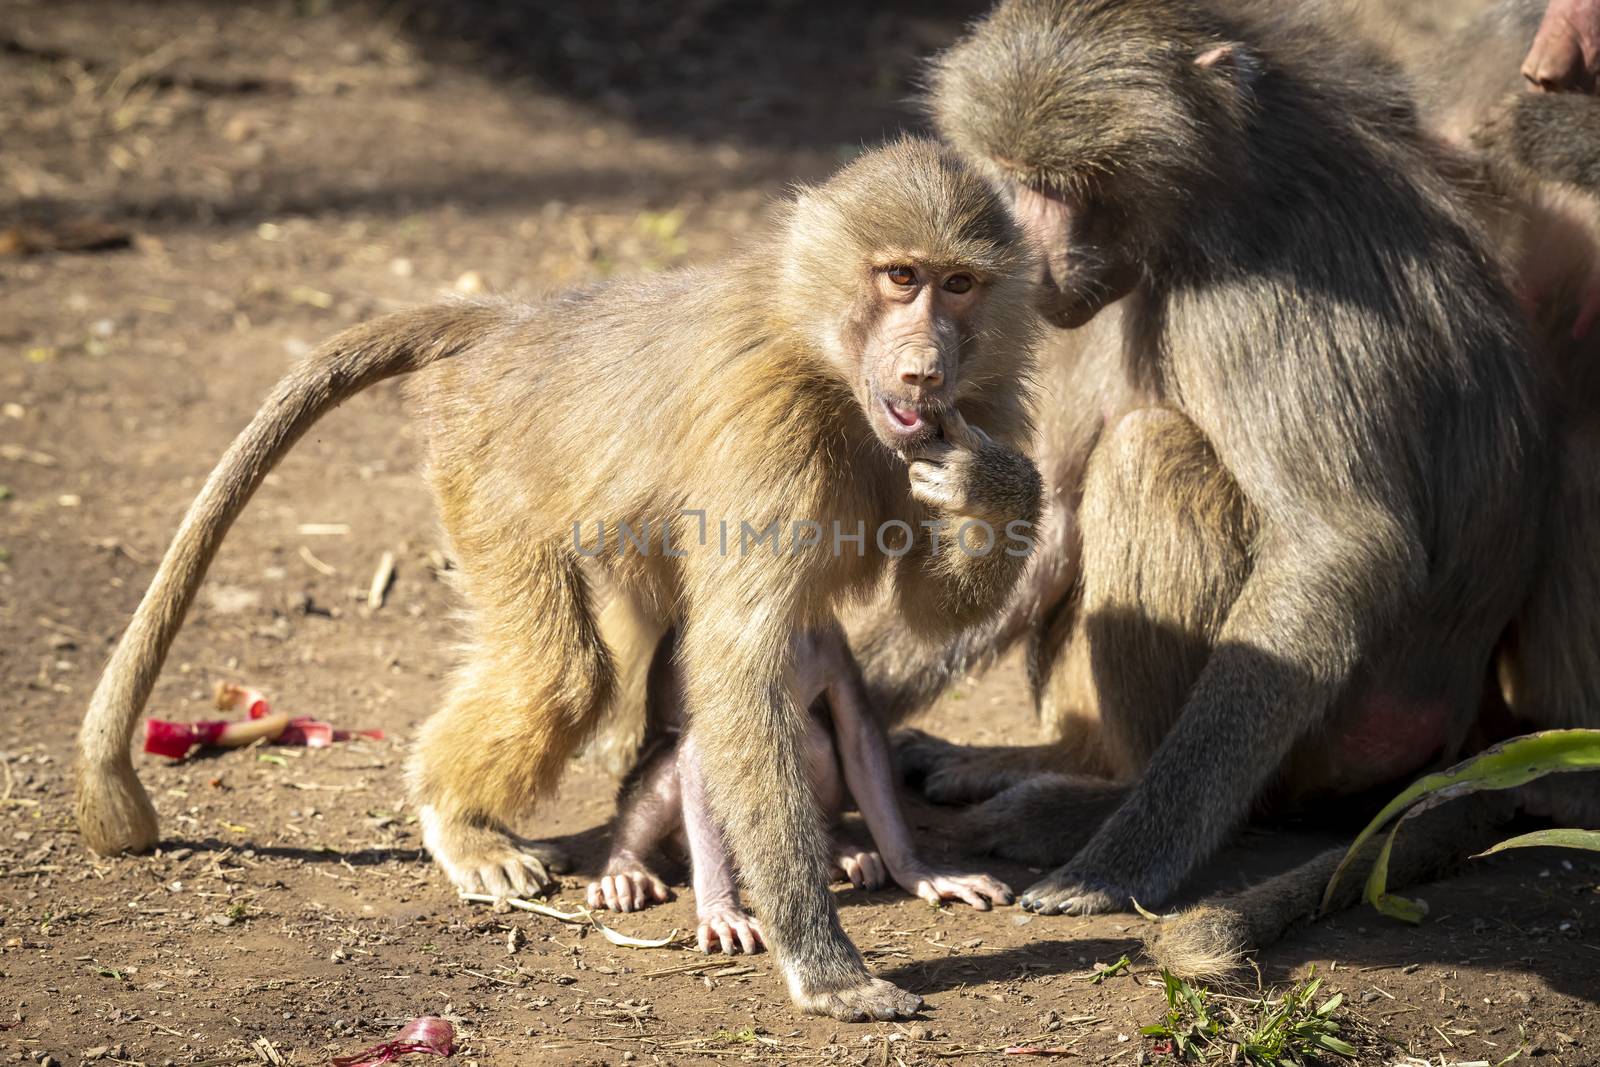 Adolescent Hamadryas Baboons preening each other